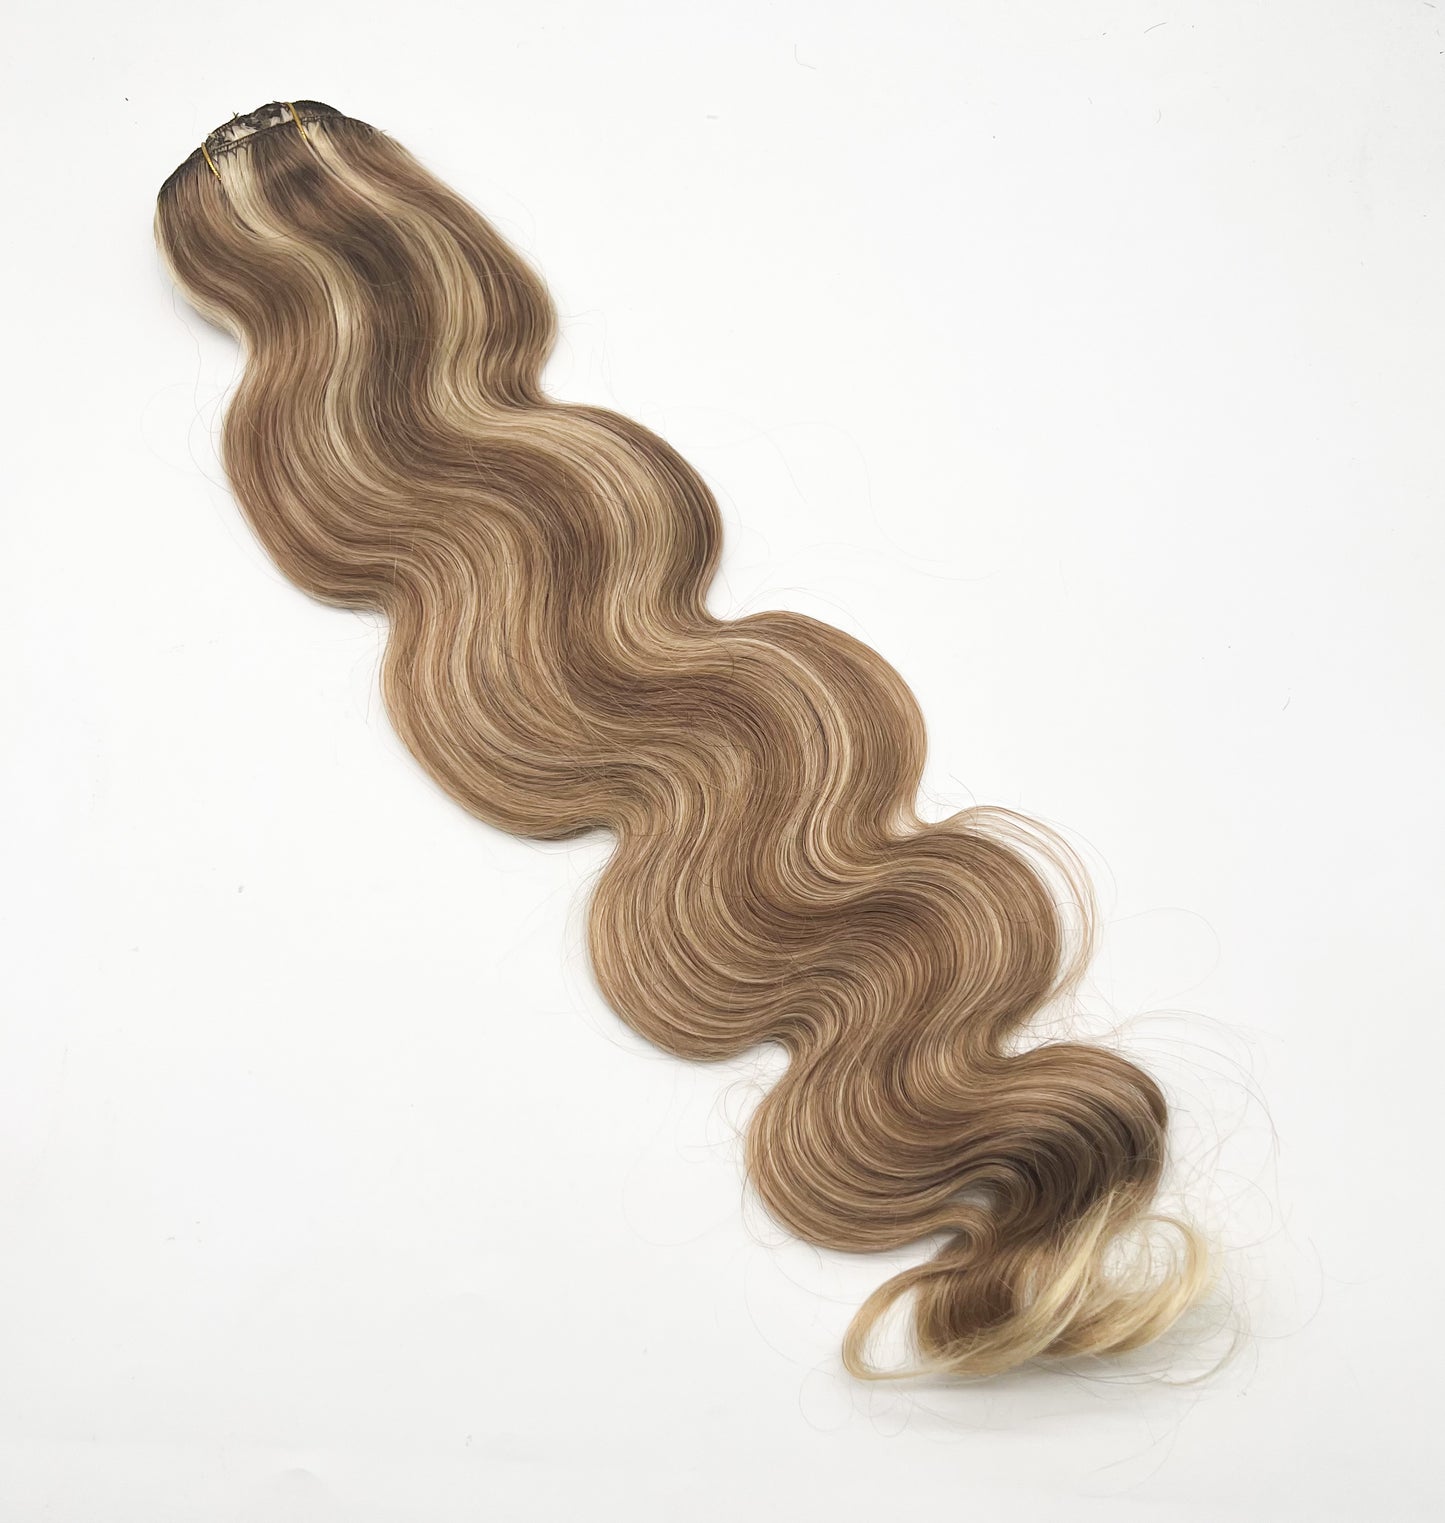 VIP Clip Extensions / Body Wave - 24'' (170 g ) - ClipeX System